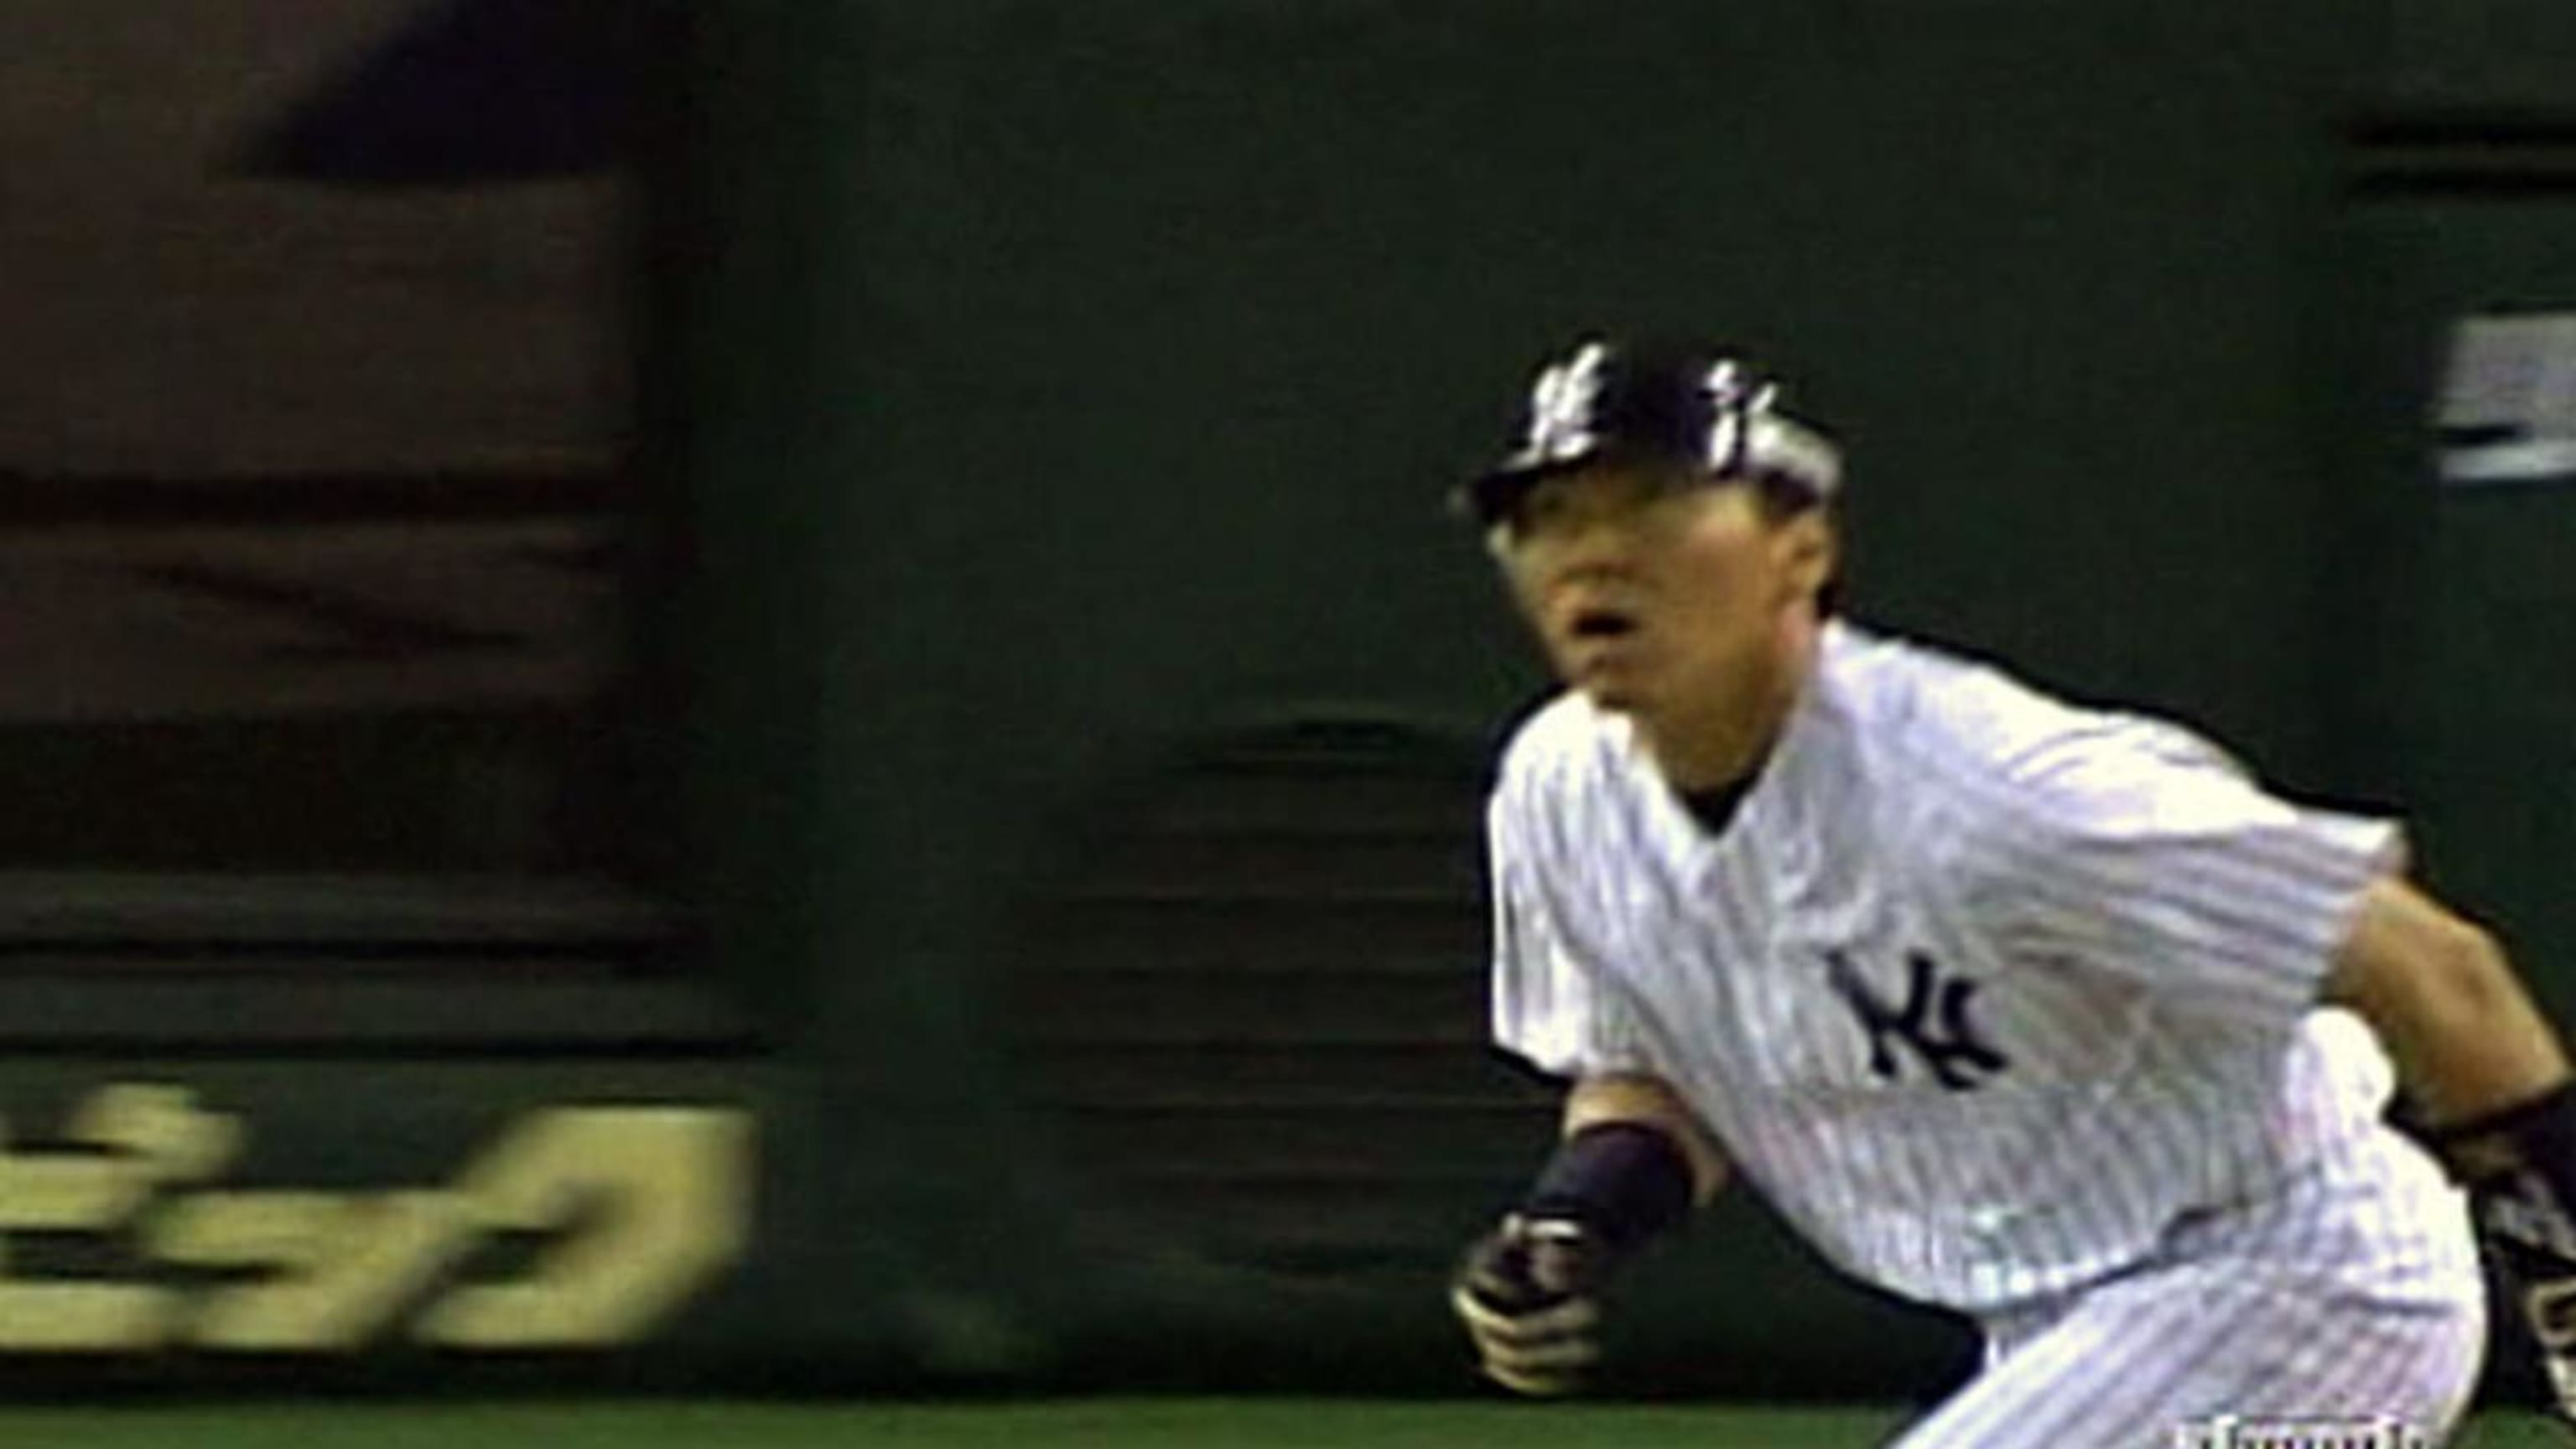 Hideki Matsui homers in Hall of Fame Classic, clearly still has it